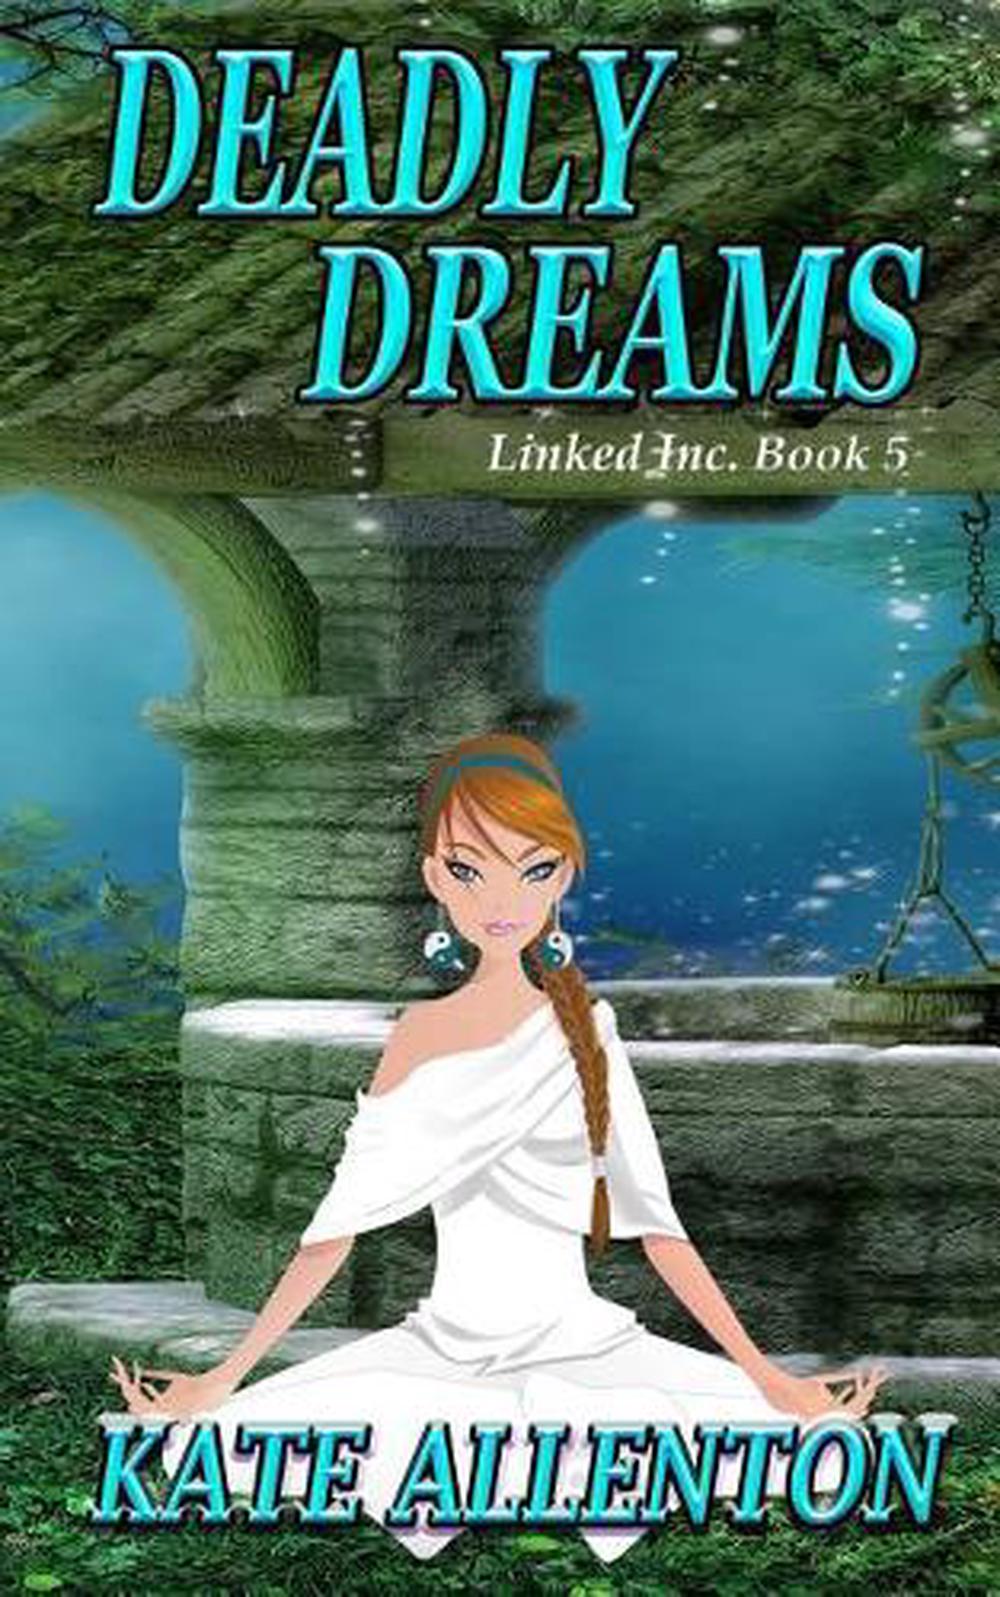 dreams of the deadly by adelaide forrest pdf